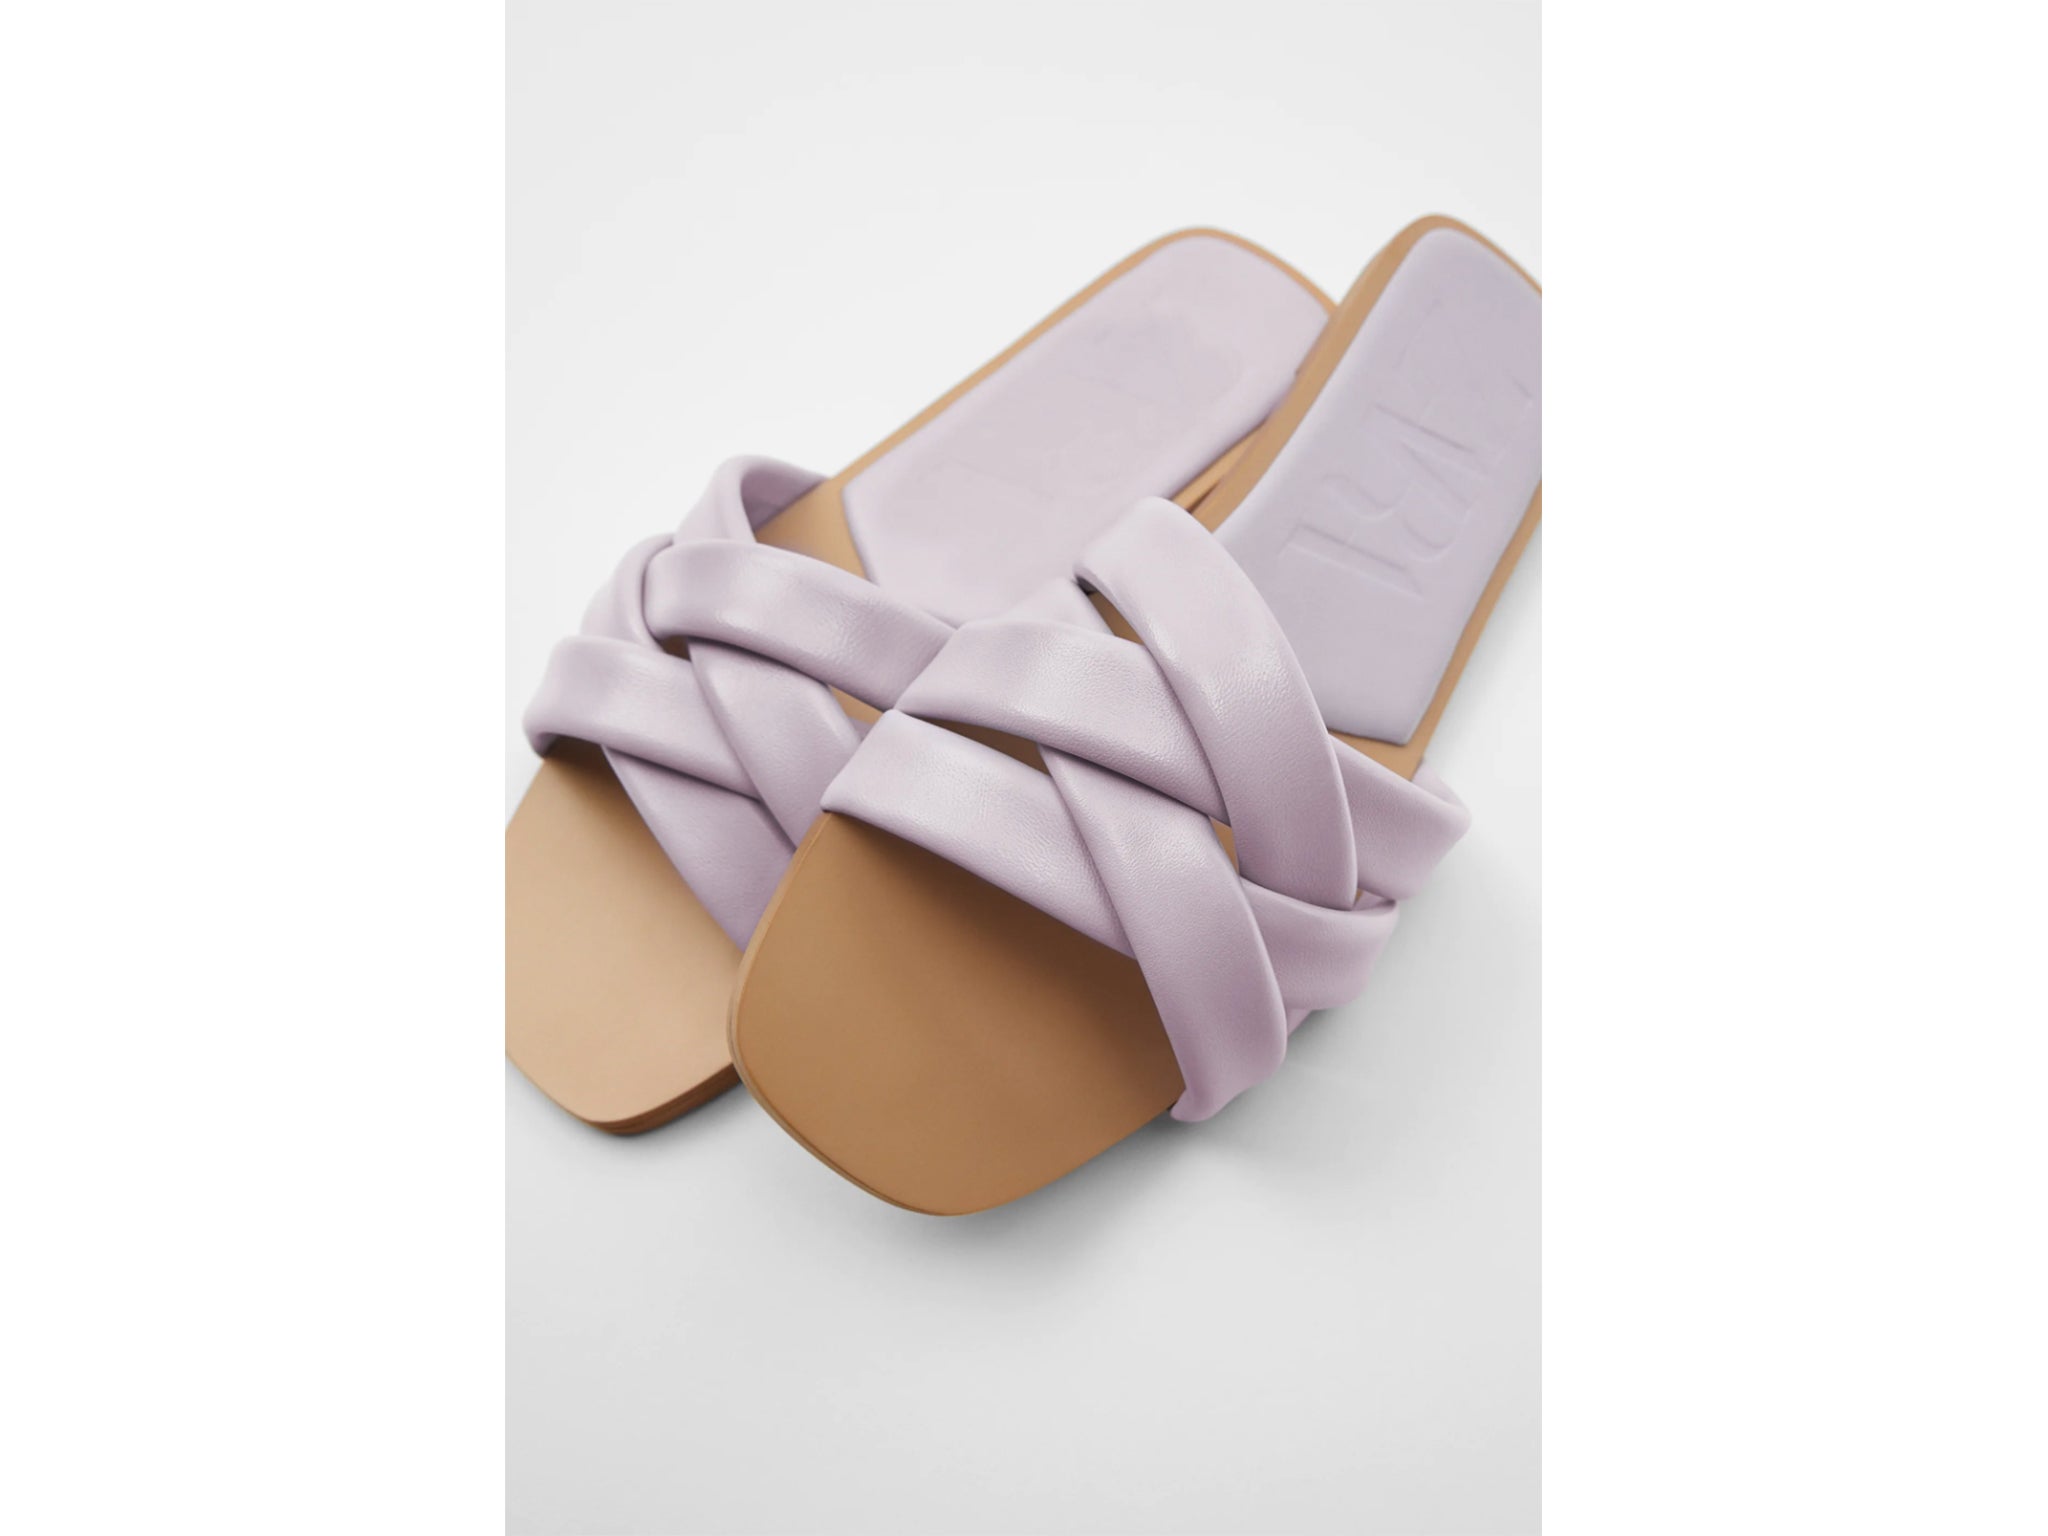 These pastel coloured sandals are perfect for a summer getaway